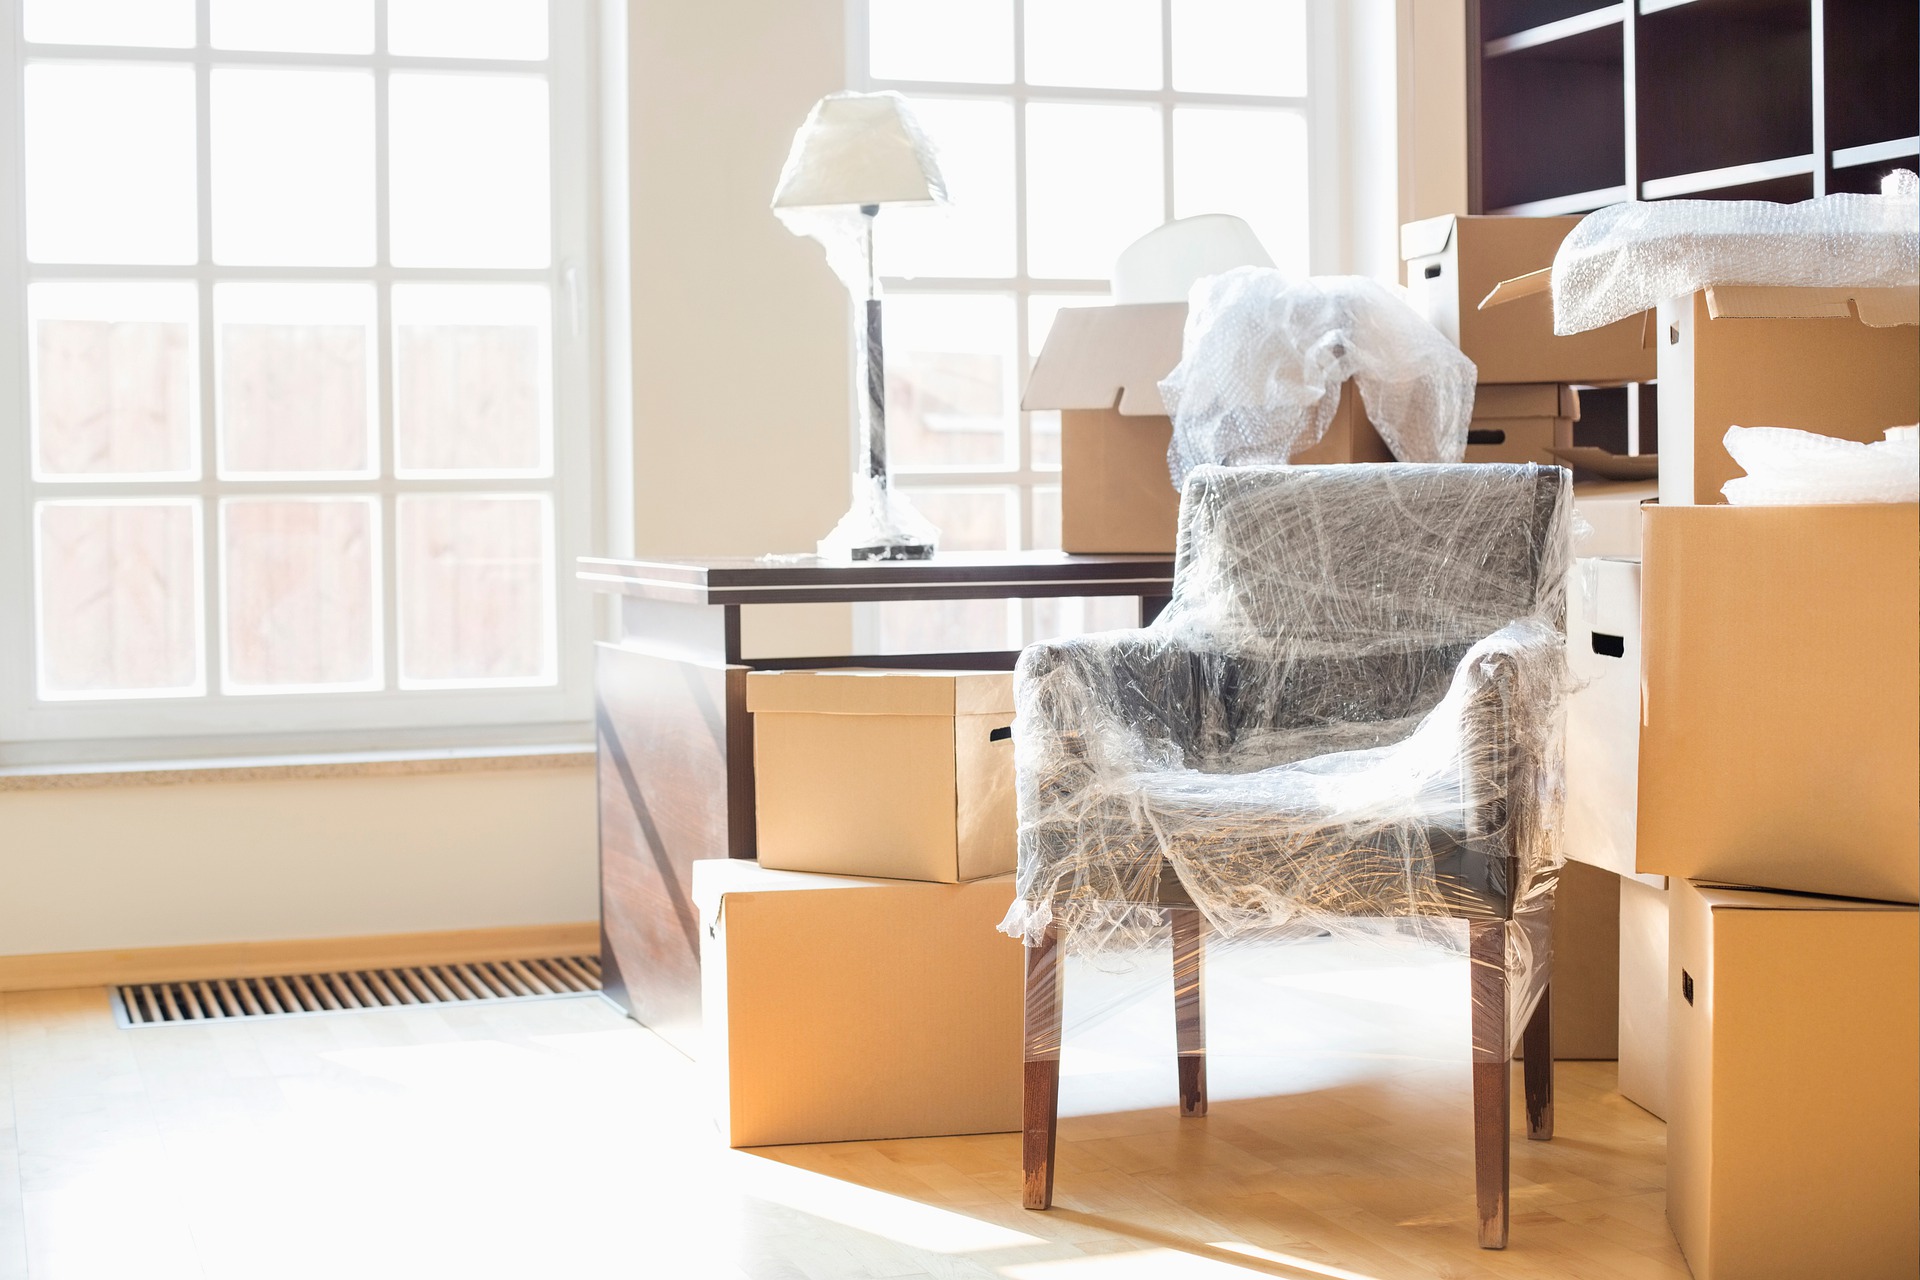 What Removals: Find Removal Companies Near You